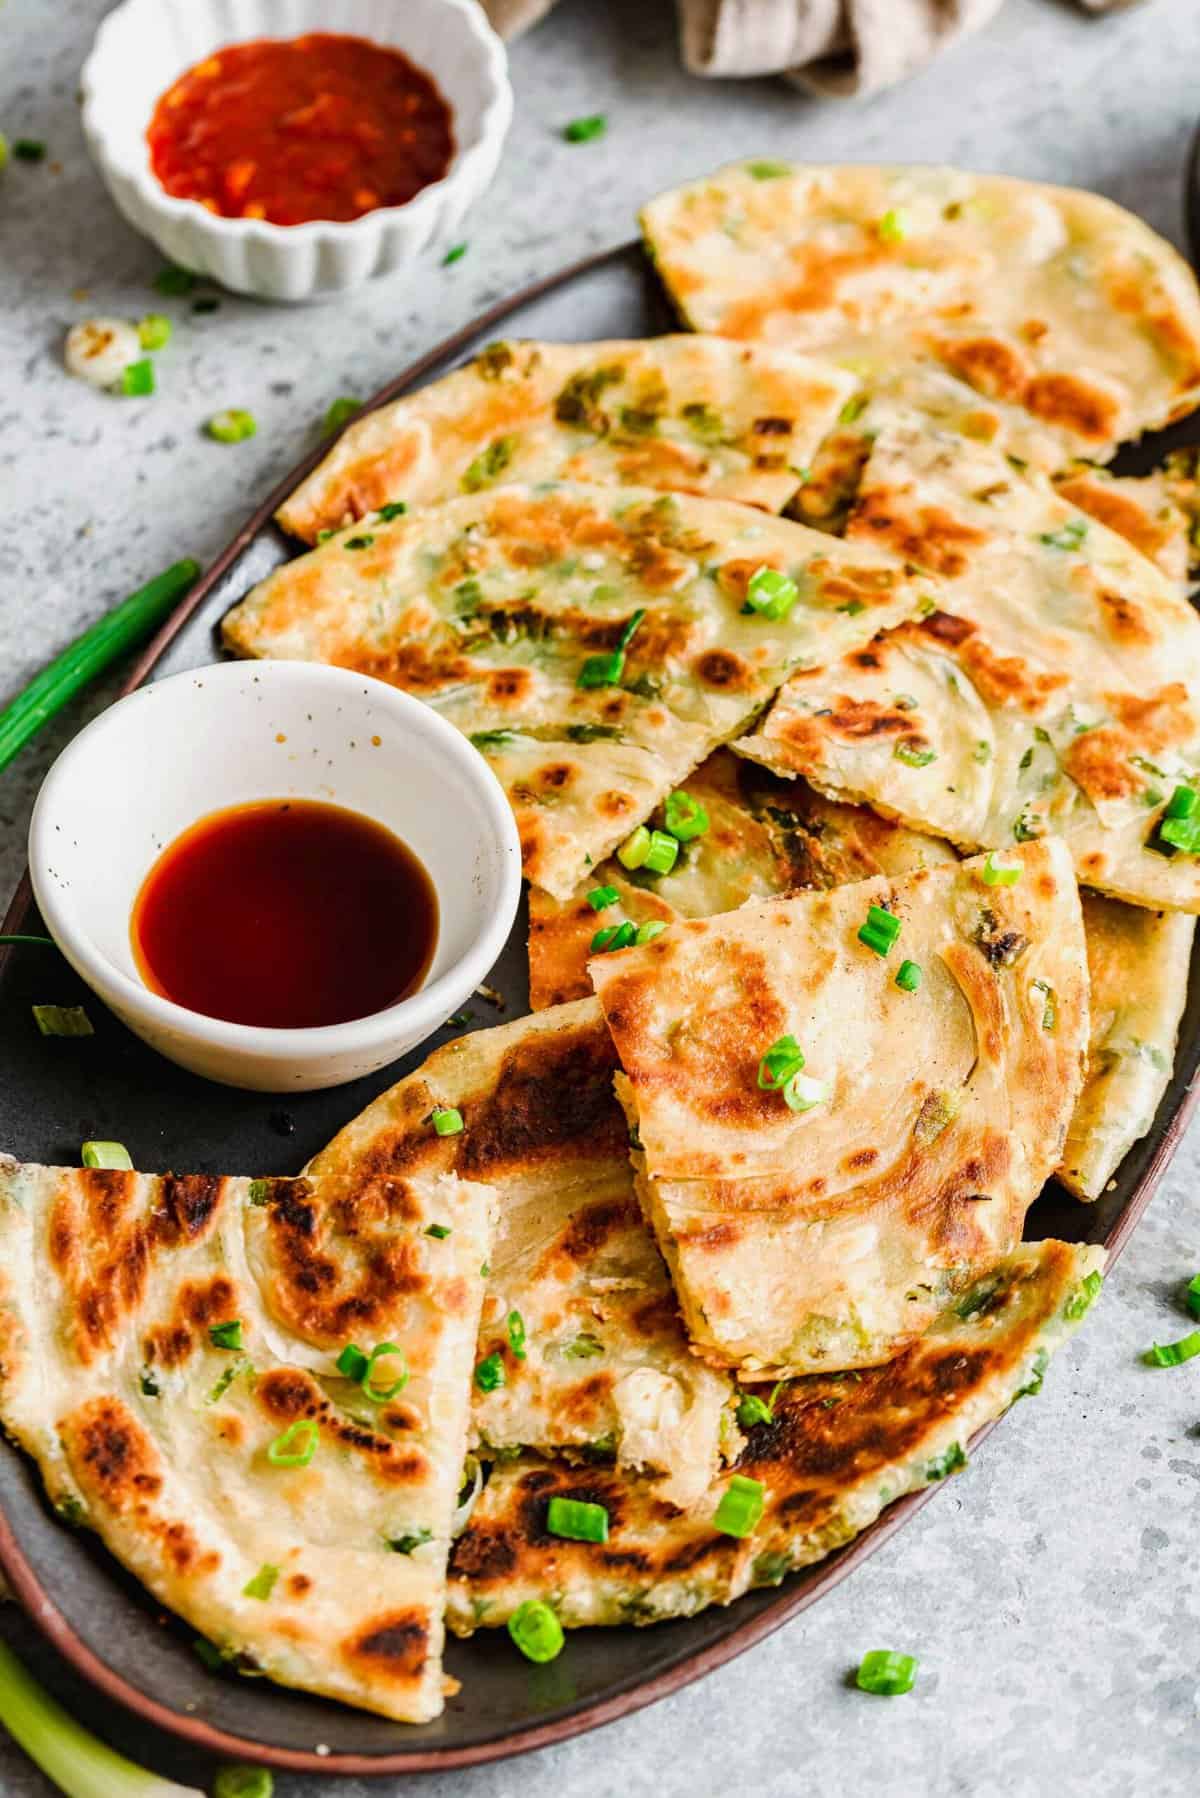 Scallion pancakes cut into triangles on a serving plate with sauce